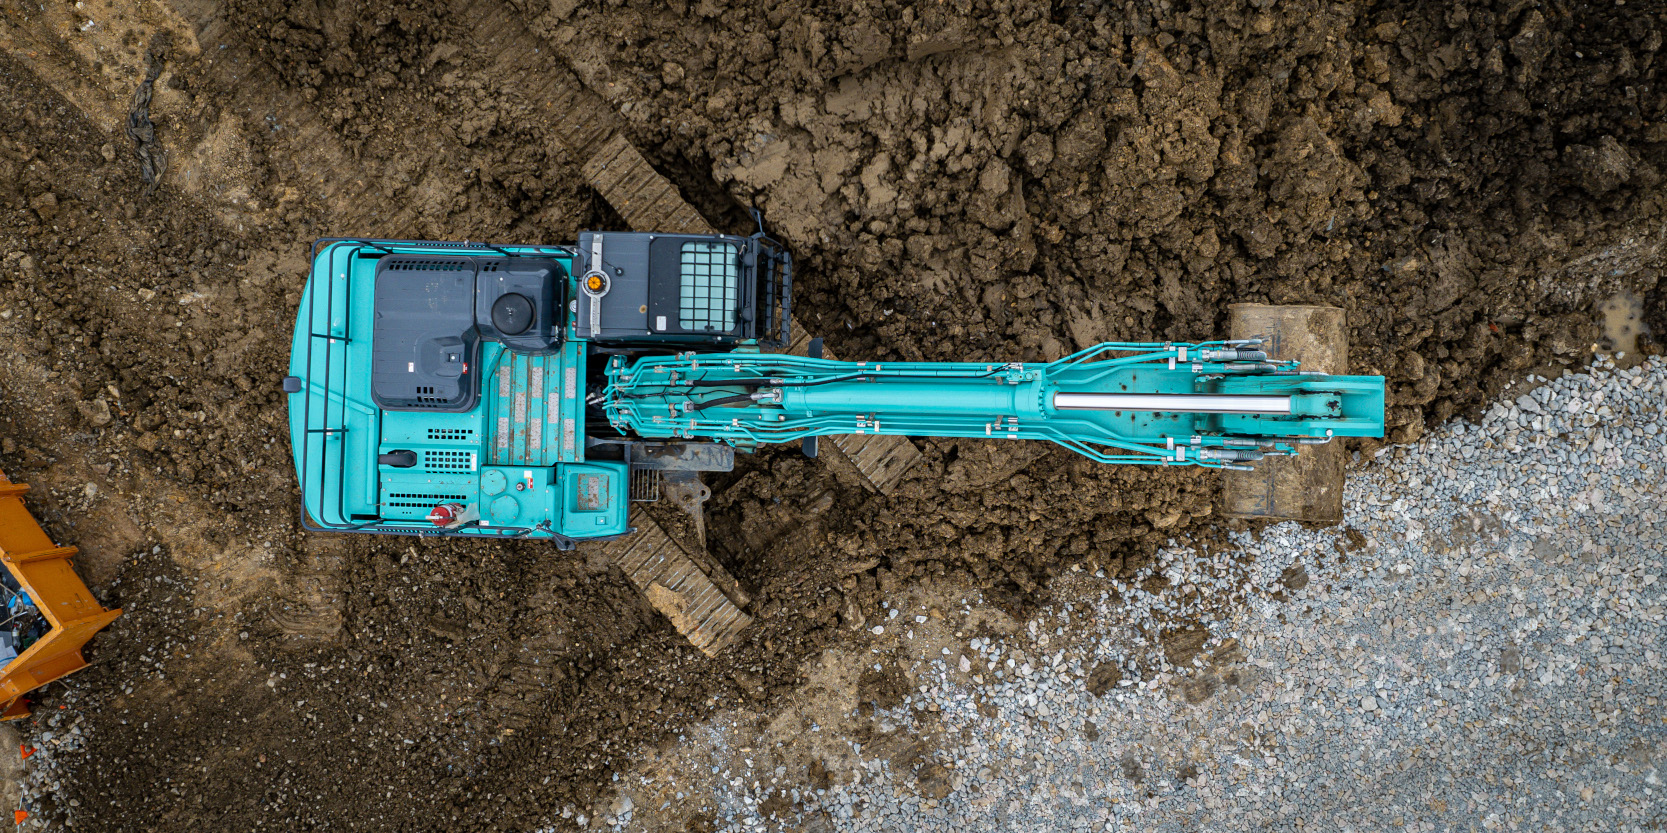 birds eye view of a machine from above